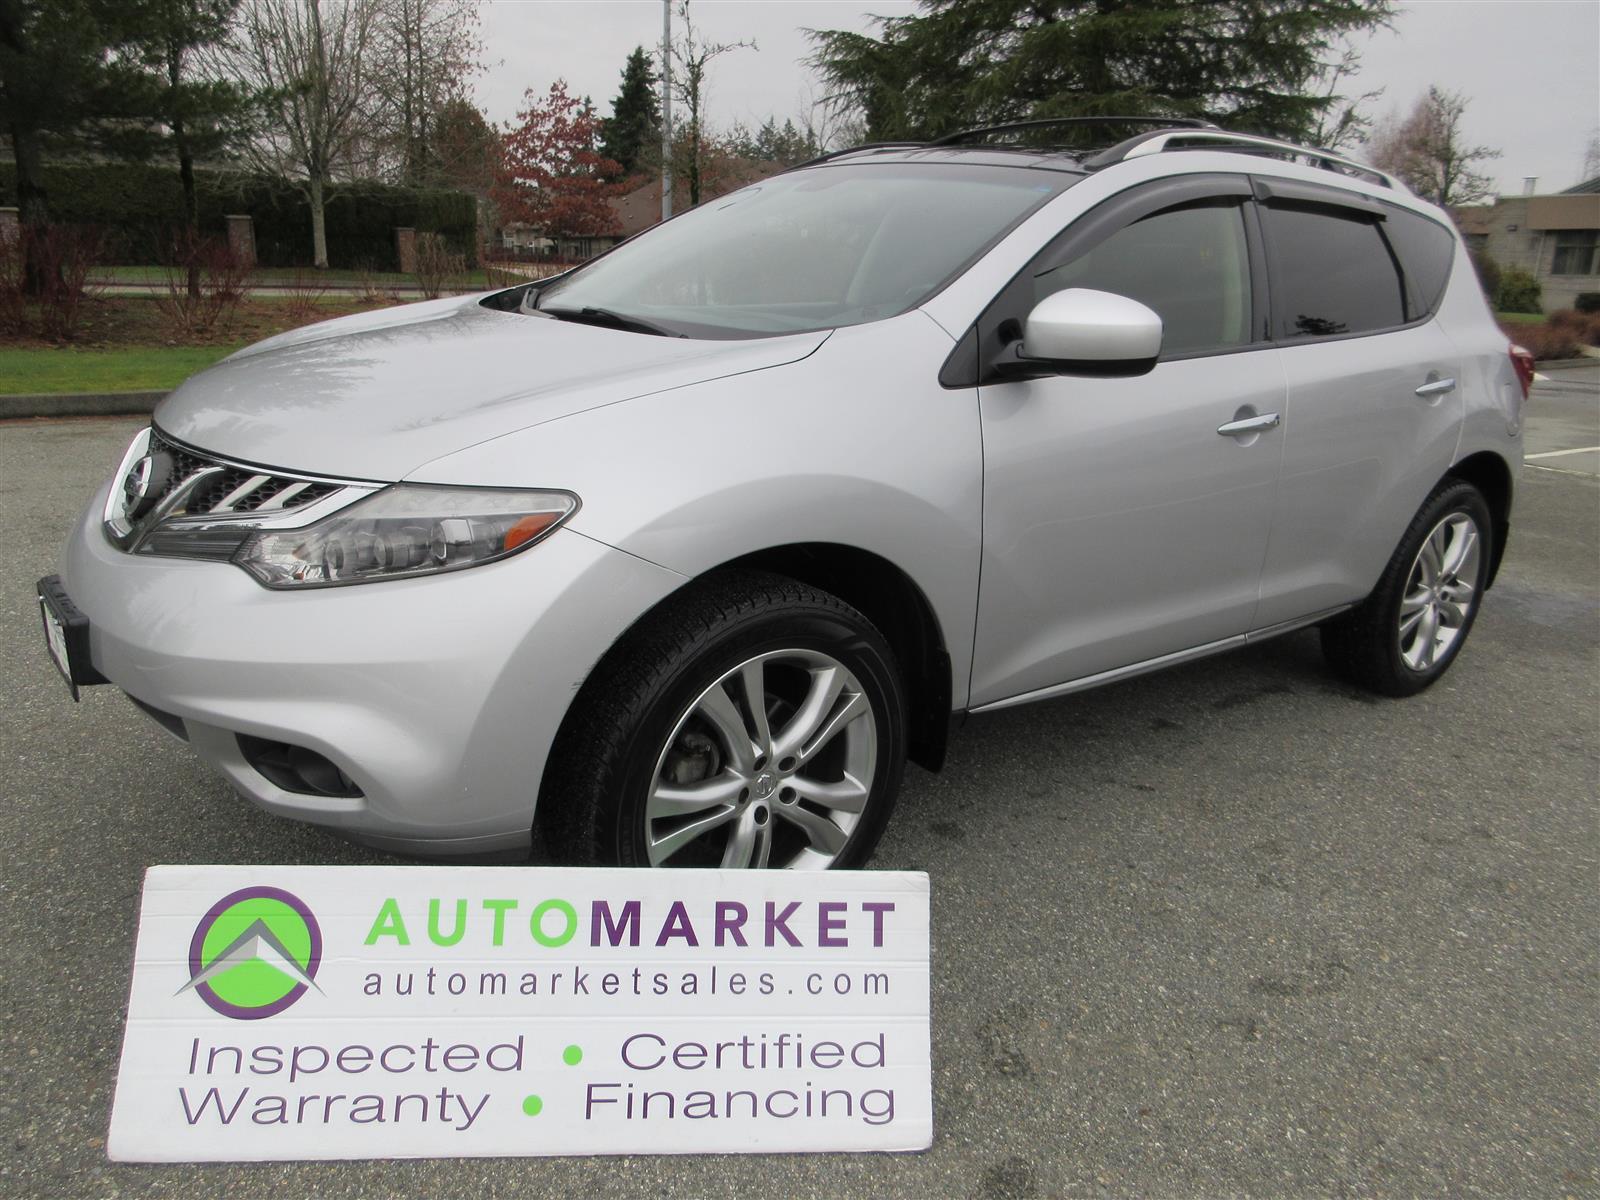 2013 Nissan Murano LE AWD LOADED INSPECTED FINANCING WARRANTY AND BCA